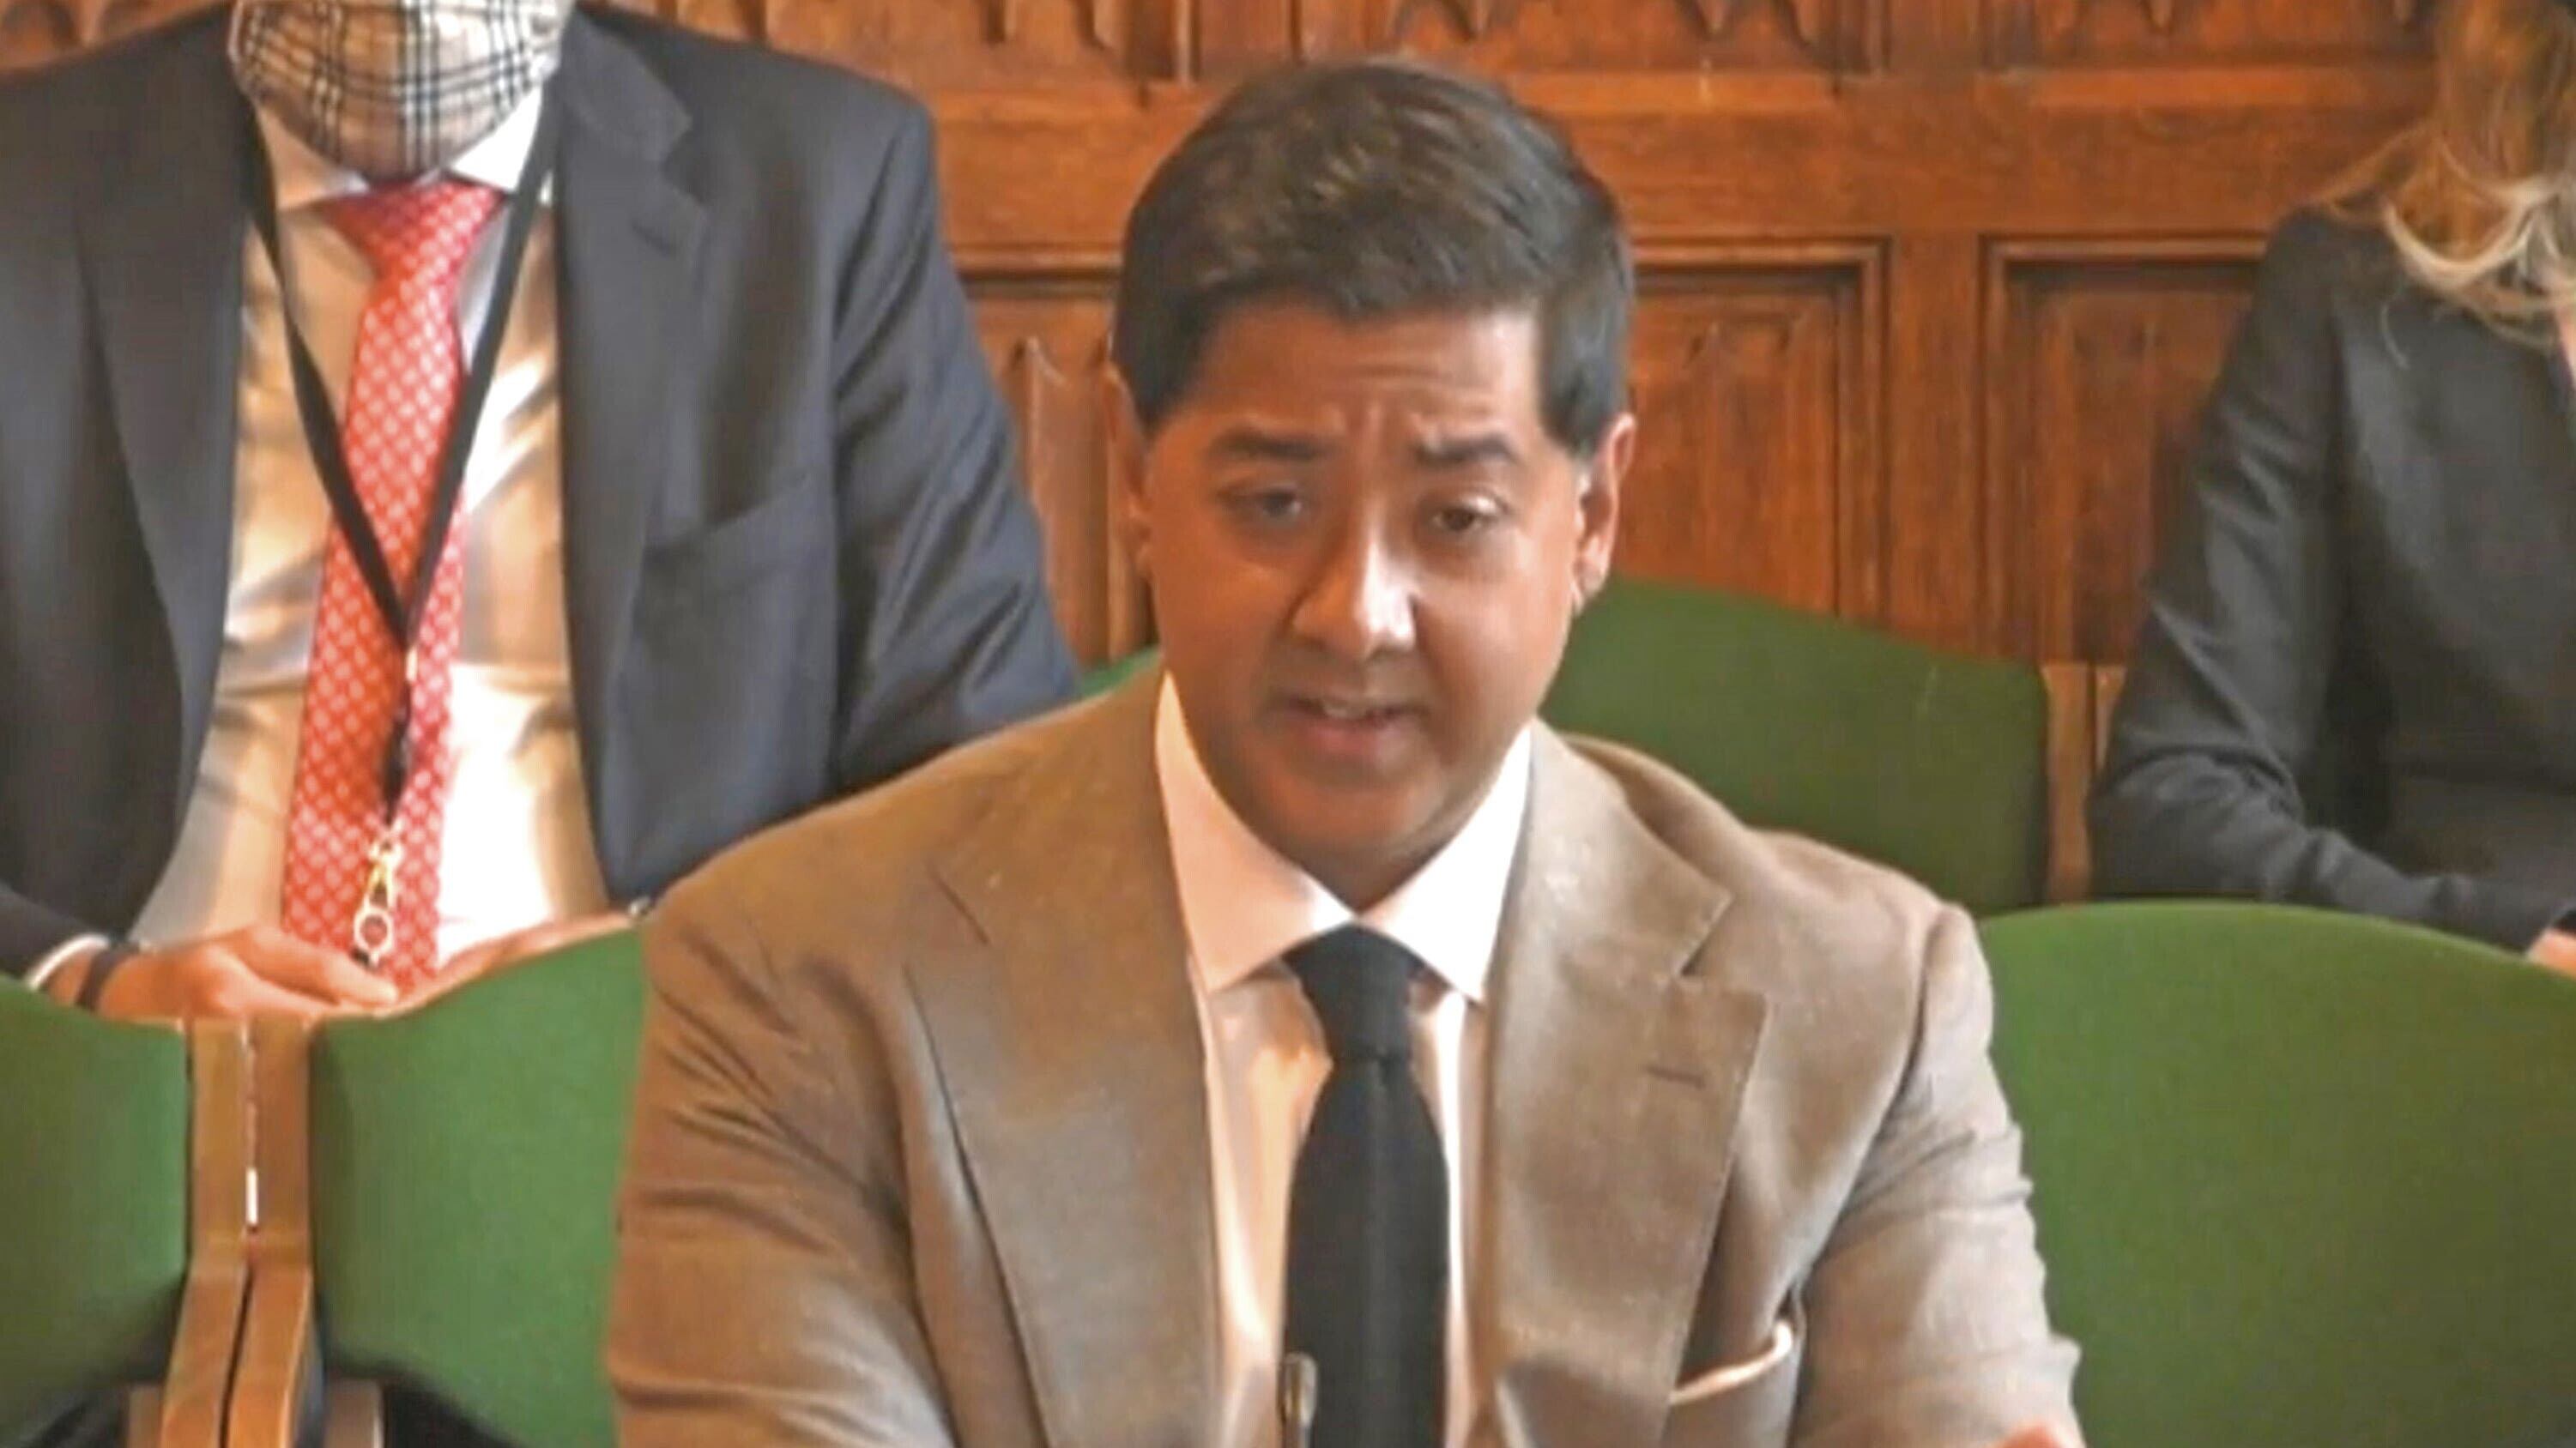 Imran Ahmed has said the case exposes the dangers of Artificial Intelligence (House of Commons/PA)